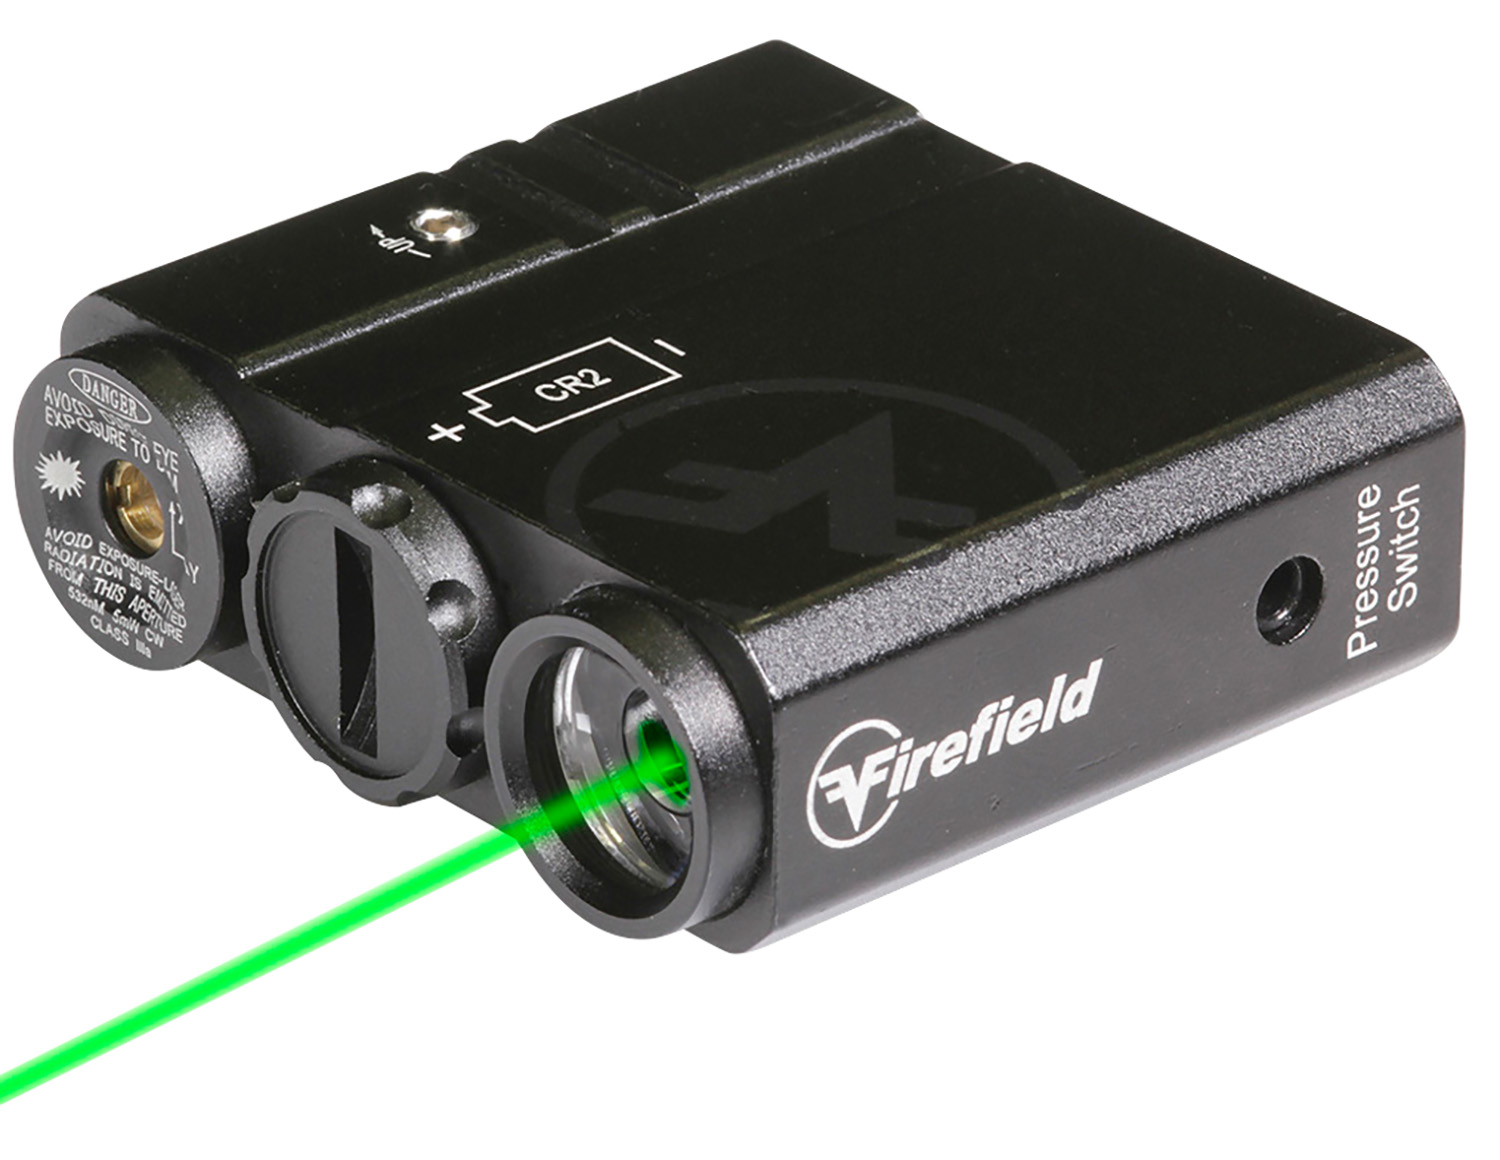 Firefield FF25009 Charge  5mW Green Laser 532nM Wavelength (50 yds Day/600 yds Night Range) with 180 Lumens LED Light Matte Black Finish for AR-Platform Includes Pressure Pad & Battery